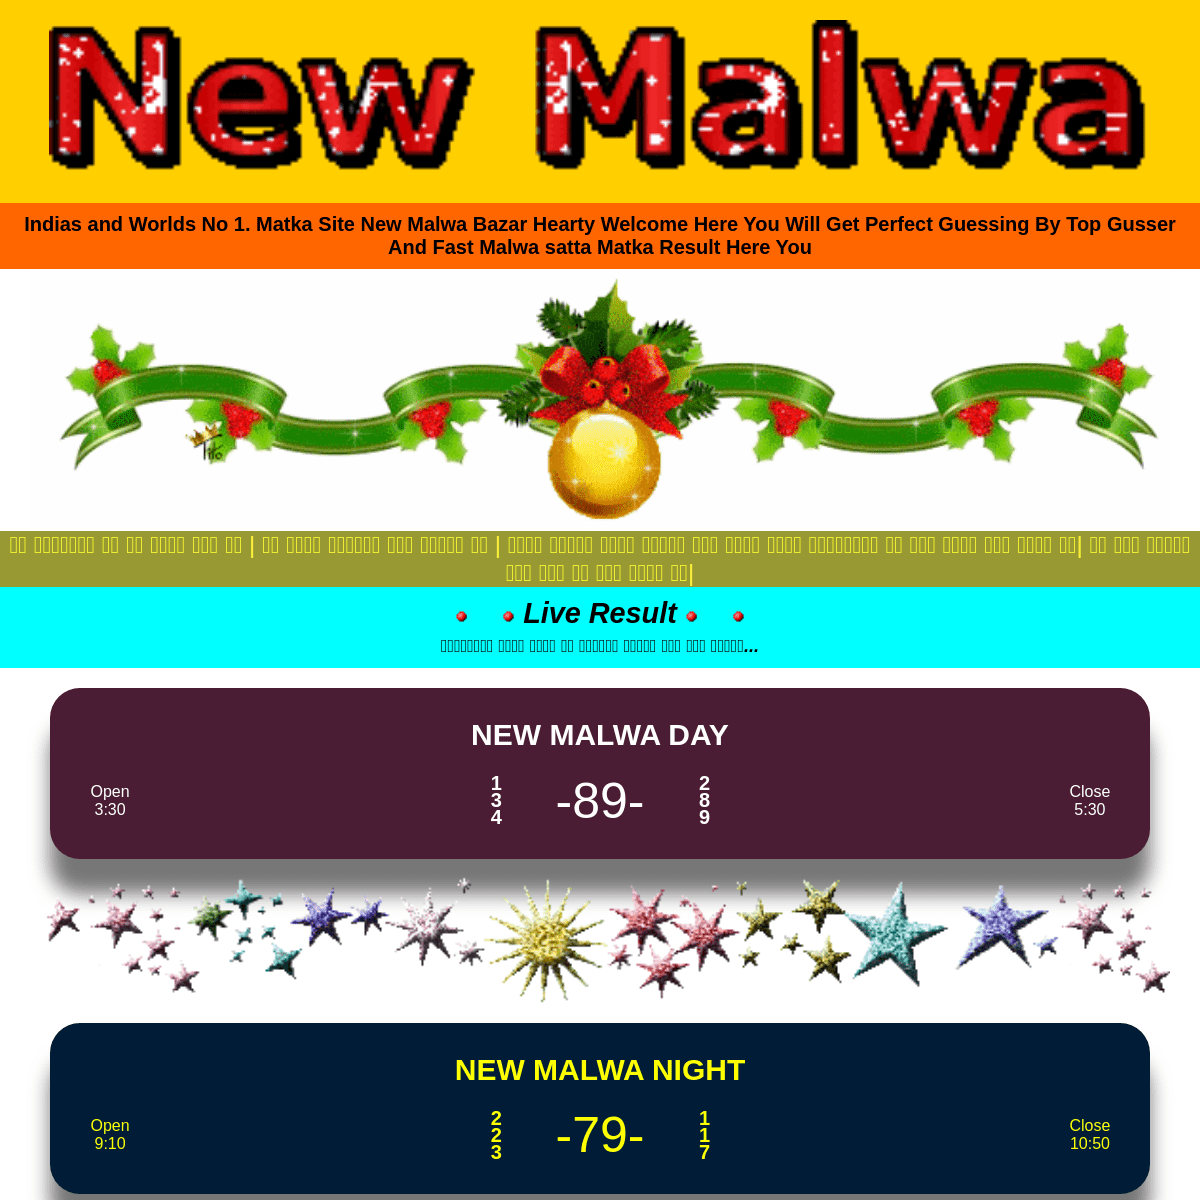 A complete backup of http://newmalwabazar.com/